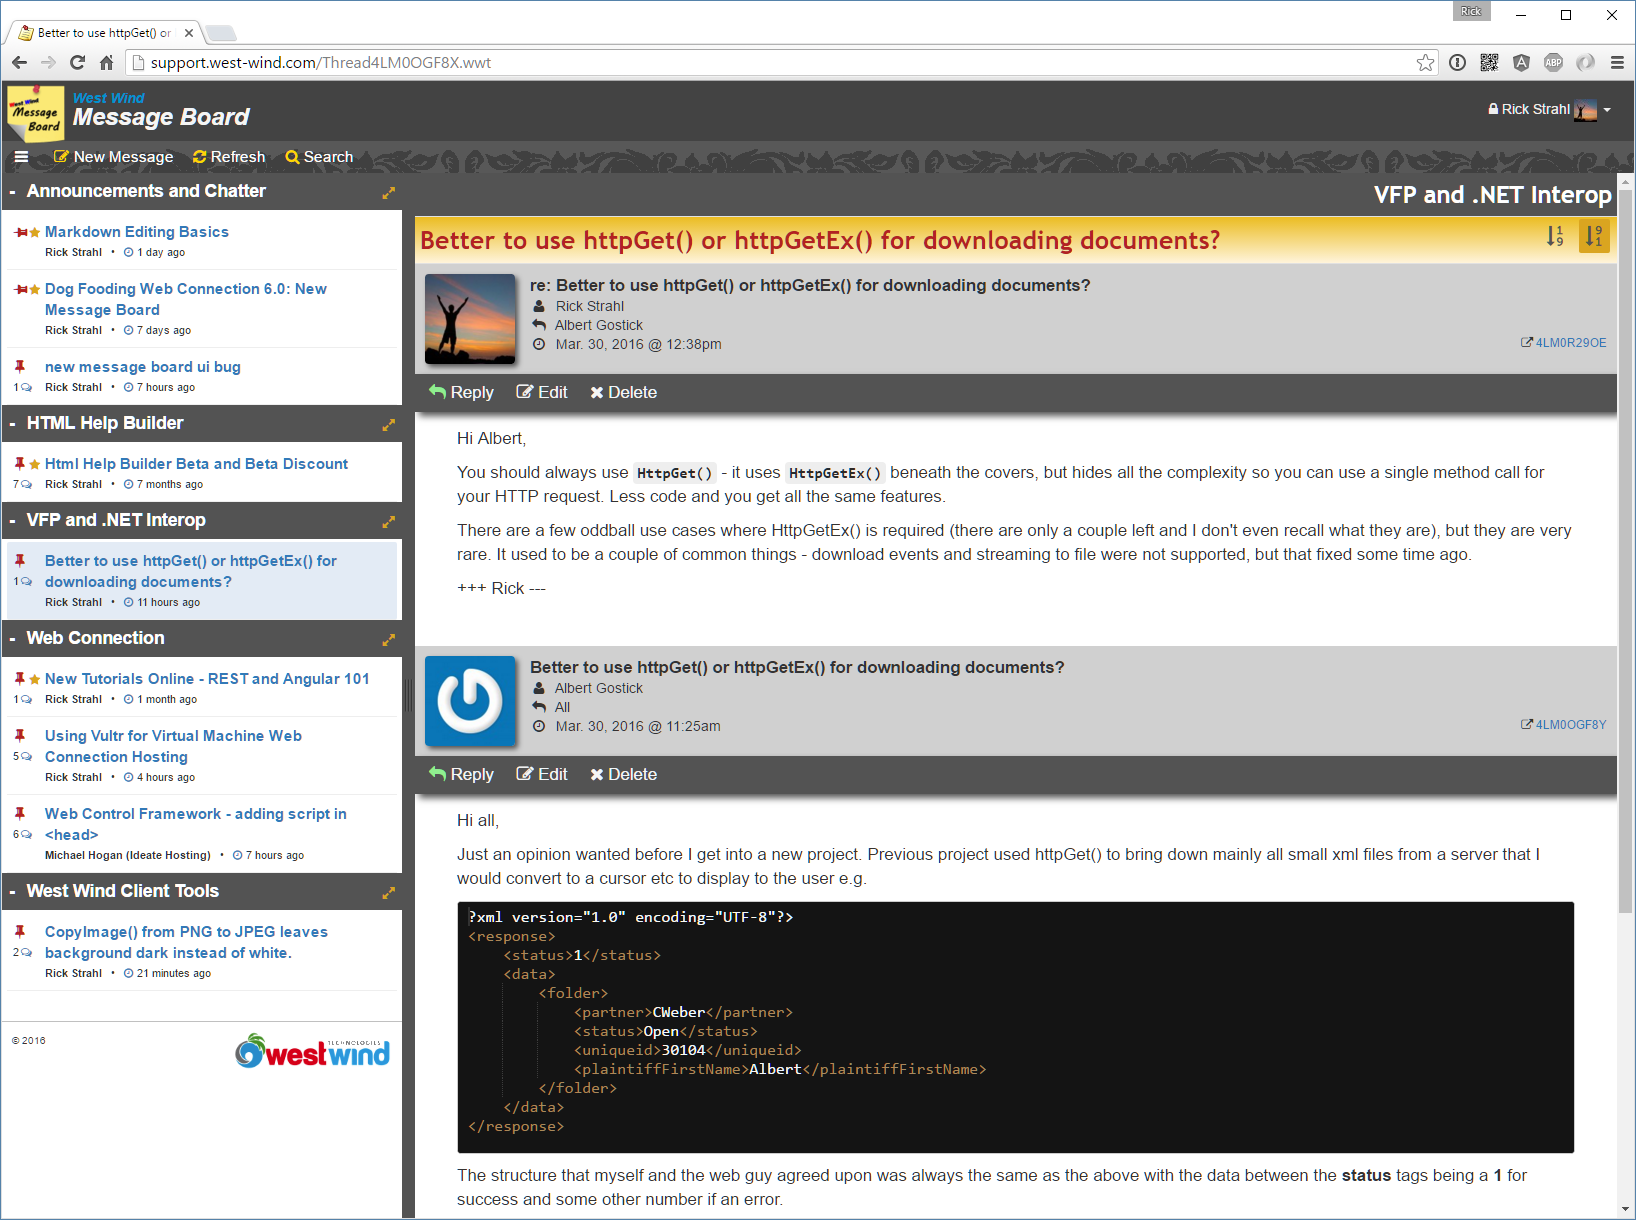 The message board is an example of an a rich, mobile ready MVC style application.